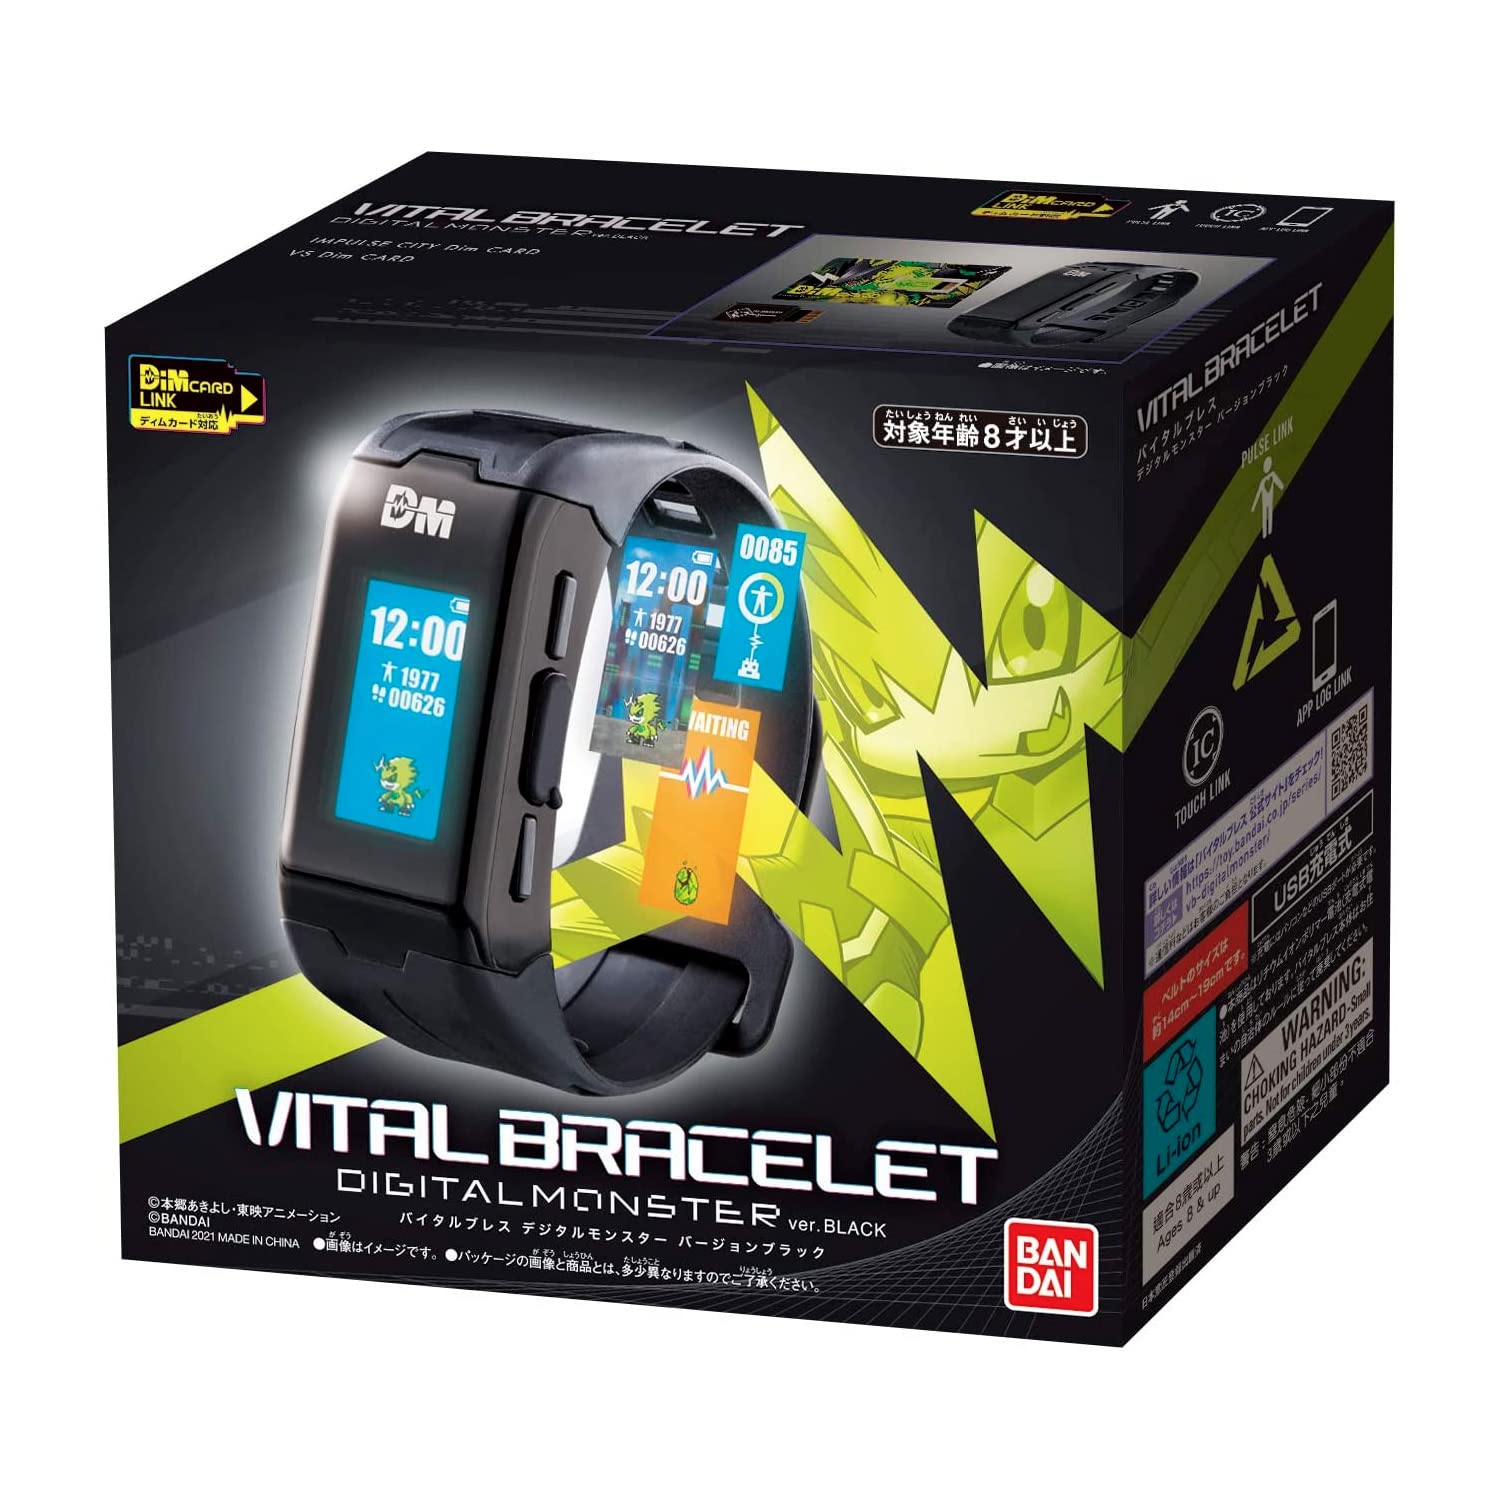 Digimon Vital Bracelet | Interactive Fitness Tracker with Step Counter, Heart Rate Monitor, Digital Watch and Virtual Pet | Train Your Digimon and Battle Your Friends | Colour Black (Free APP)